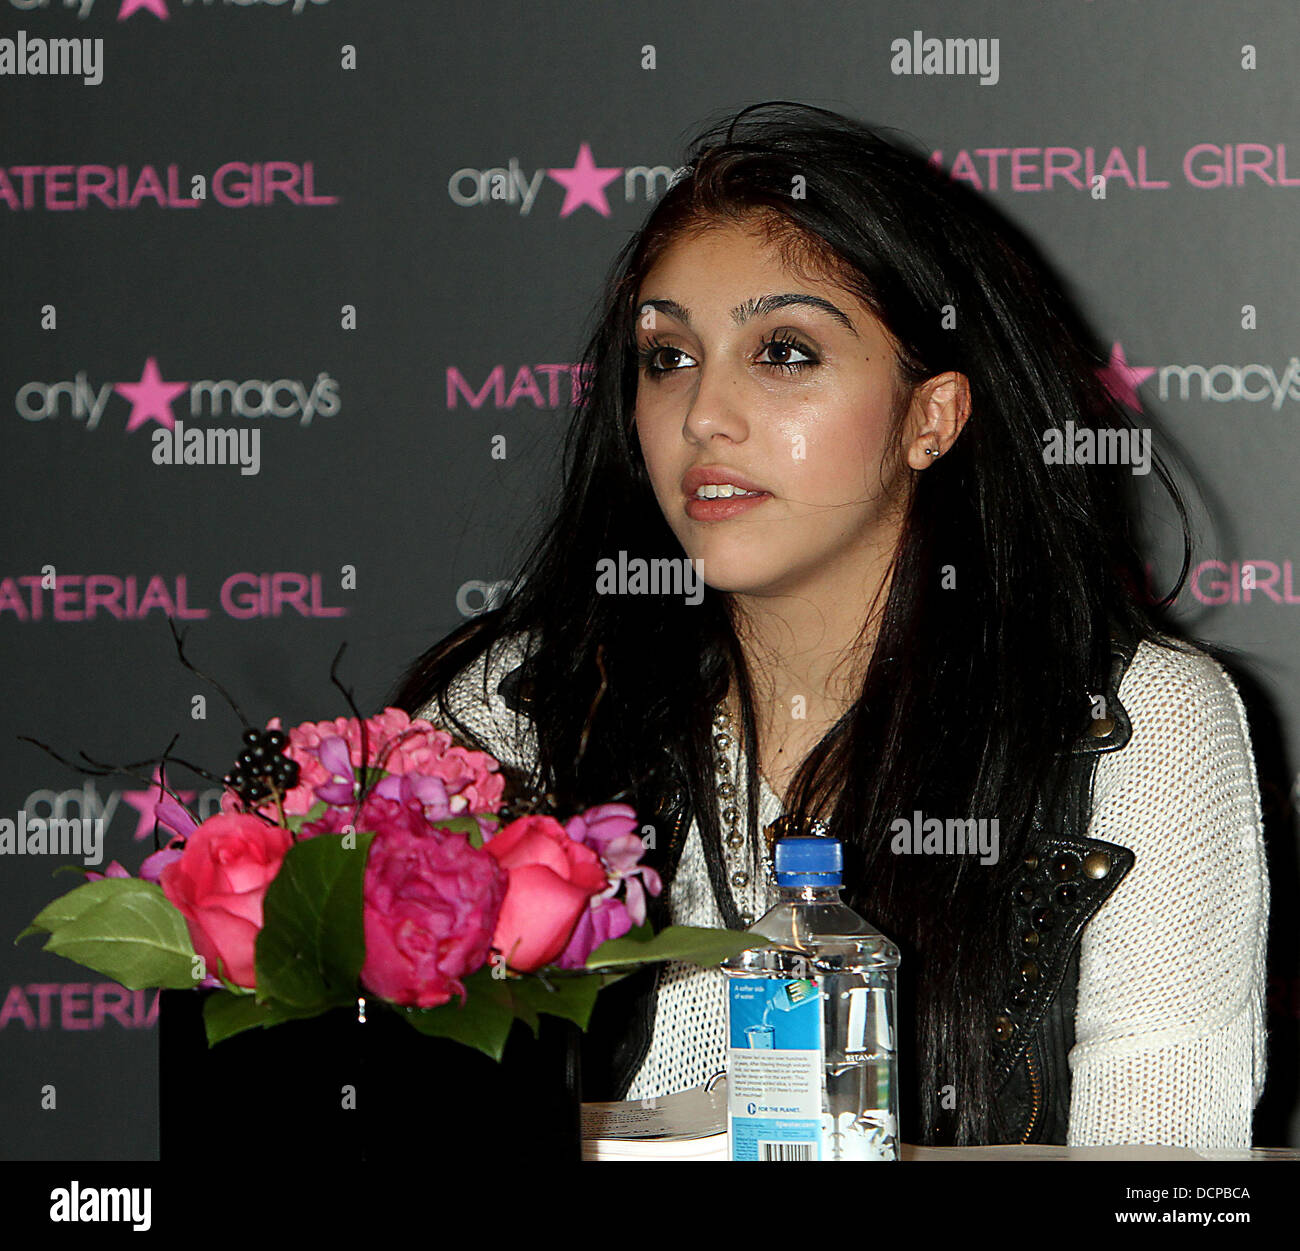 Lourdes Leon Macy’s Hosts Material Girl Model Search in Herald Square New York City, USA - 02.11.2011 Stock Photo